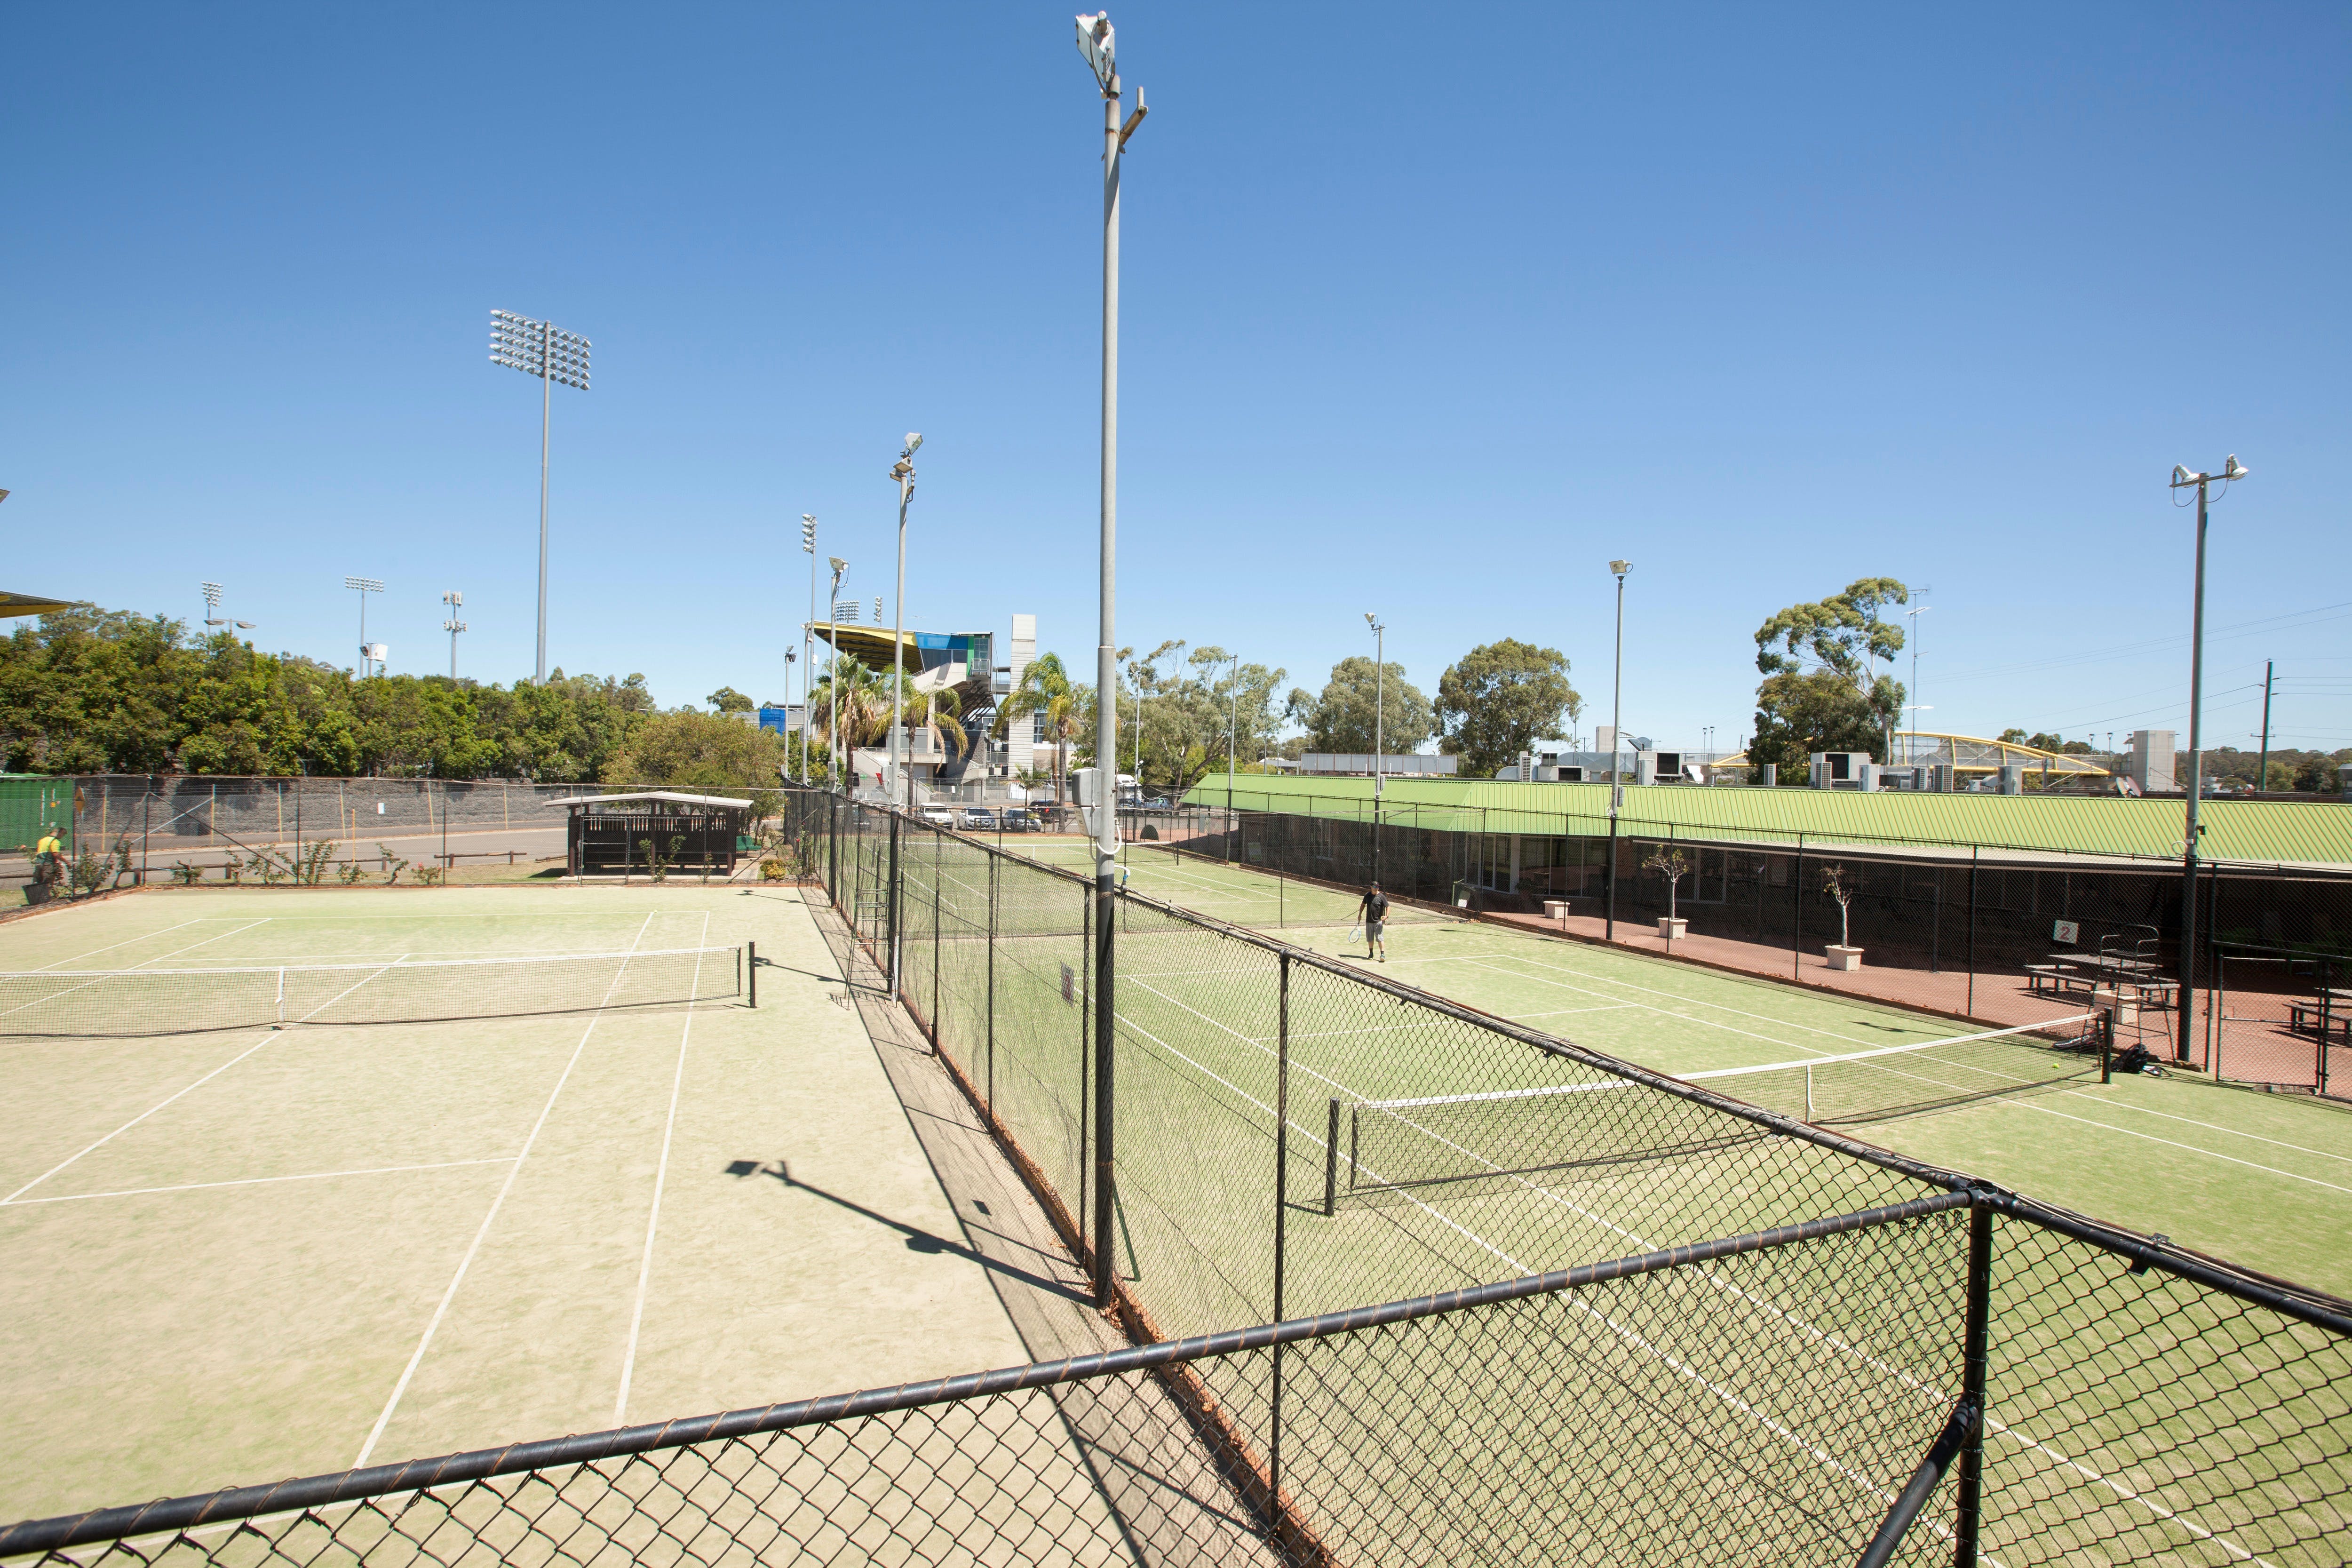 Wests Tennis Club - Attractions